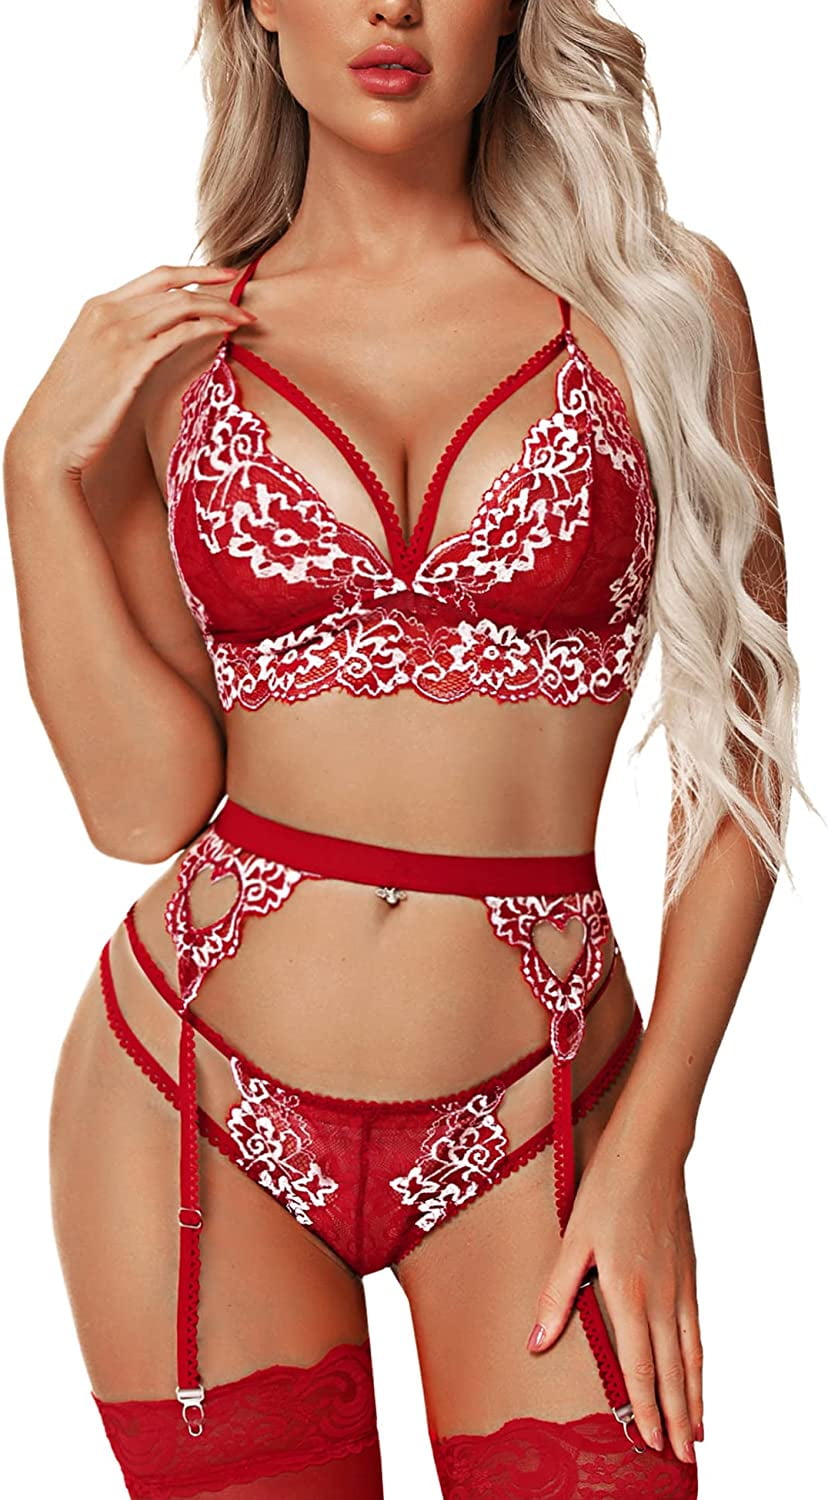  Donnalla Womens Sexy Lingerie Set Lace Bra and Panty